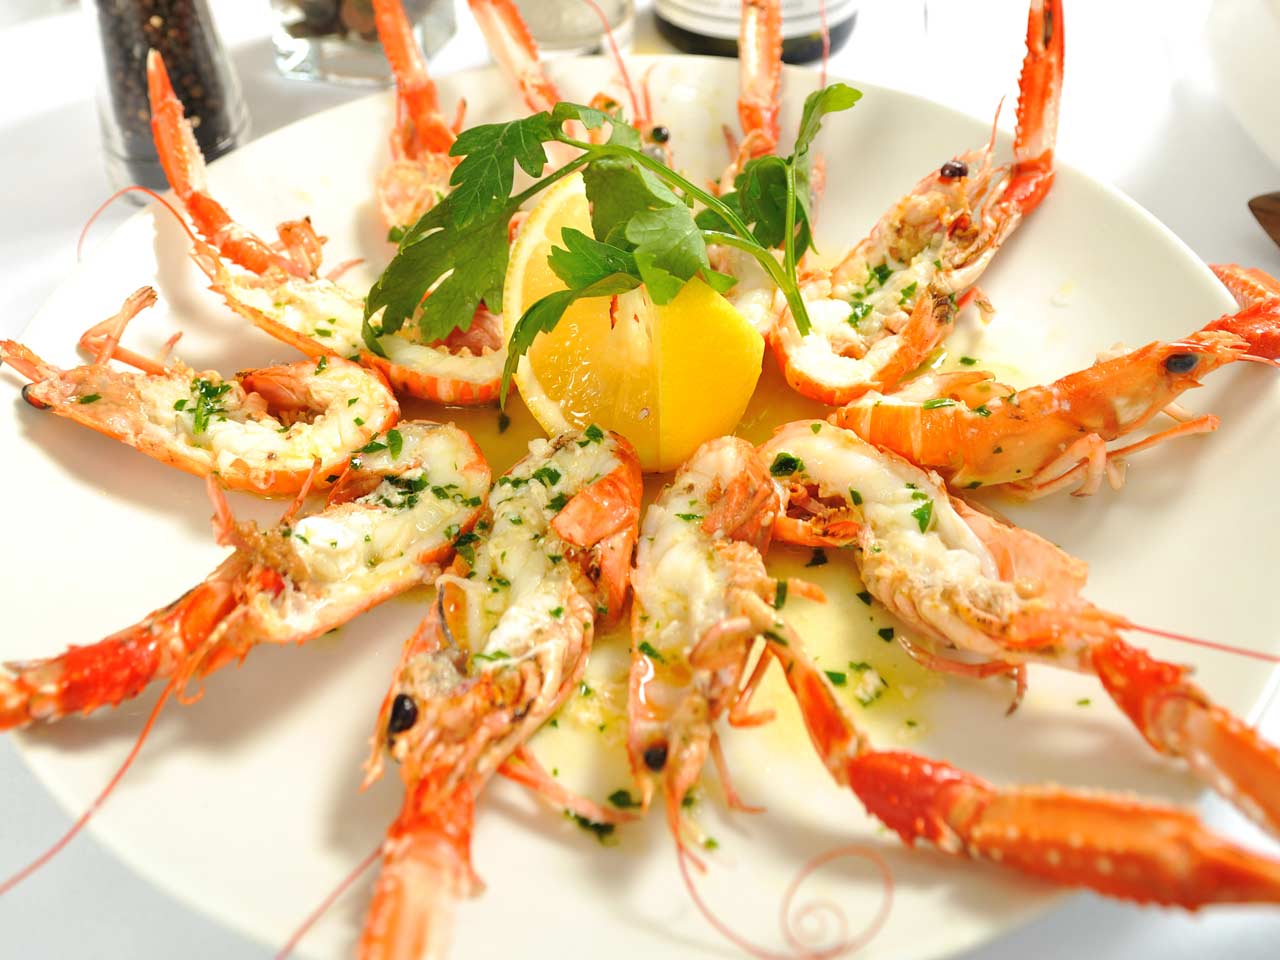 Grilled langoustines